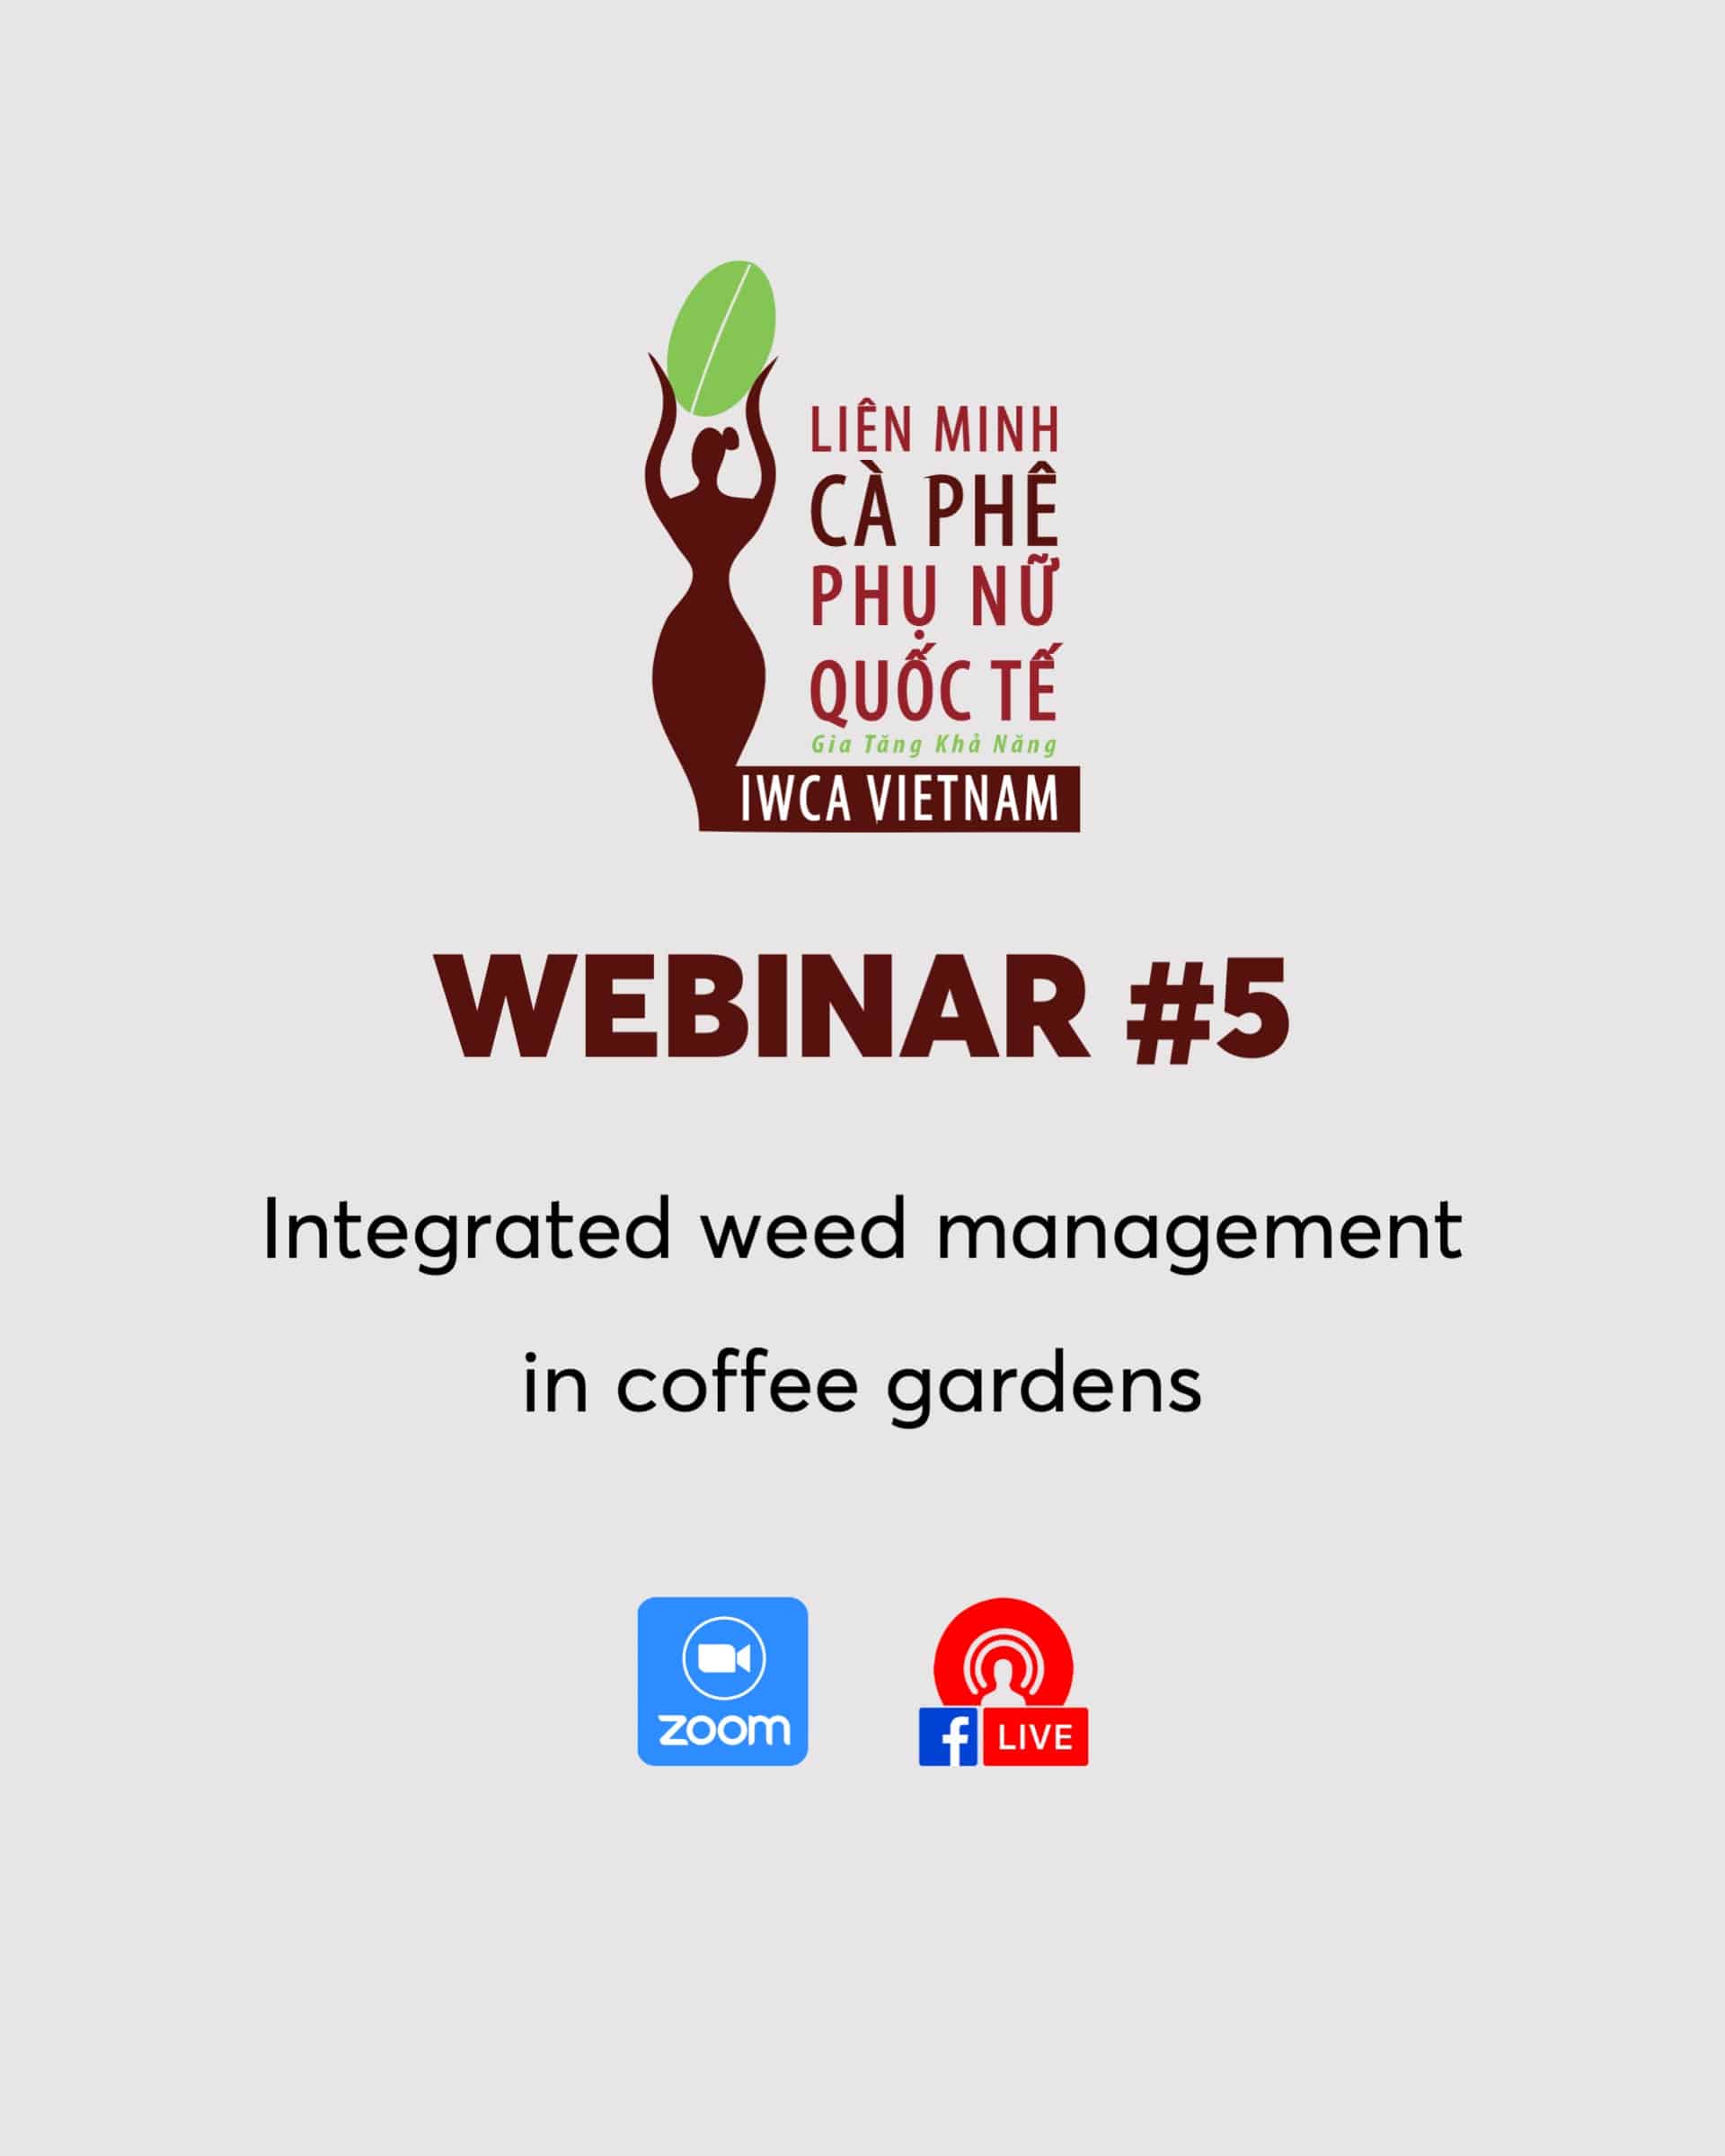 Webinar #5: Integrated weed management in coffee gardens